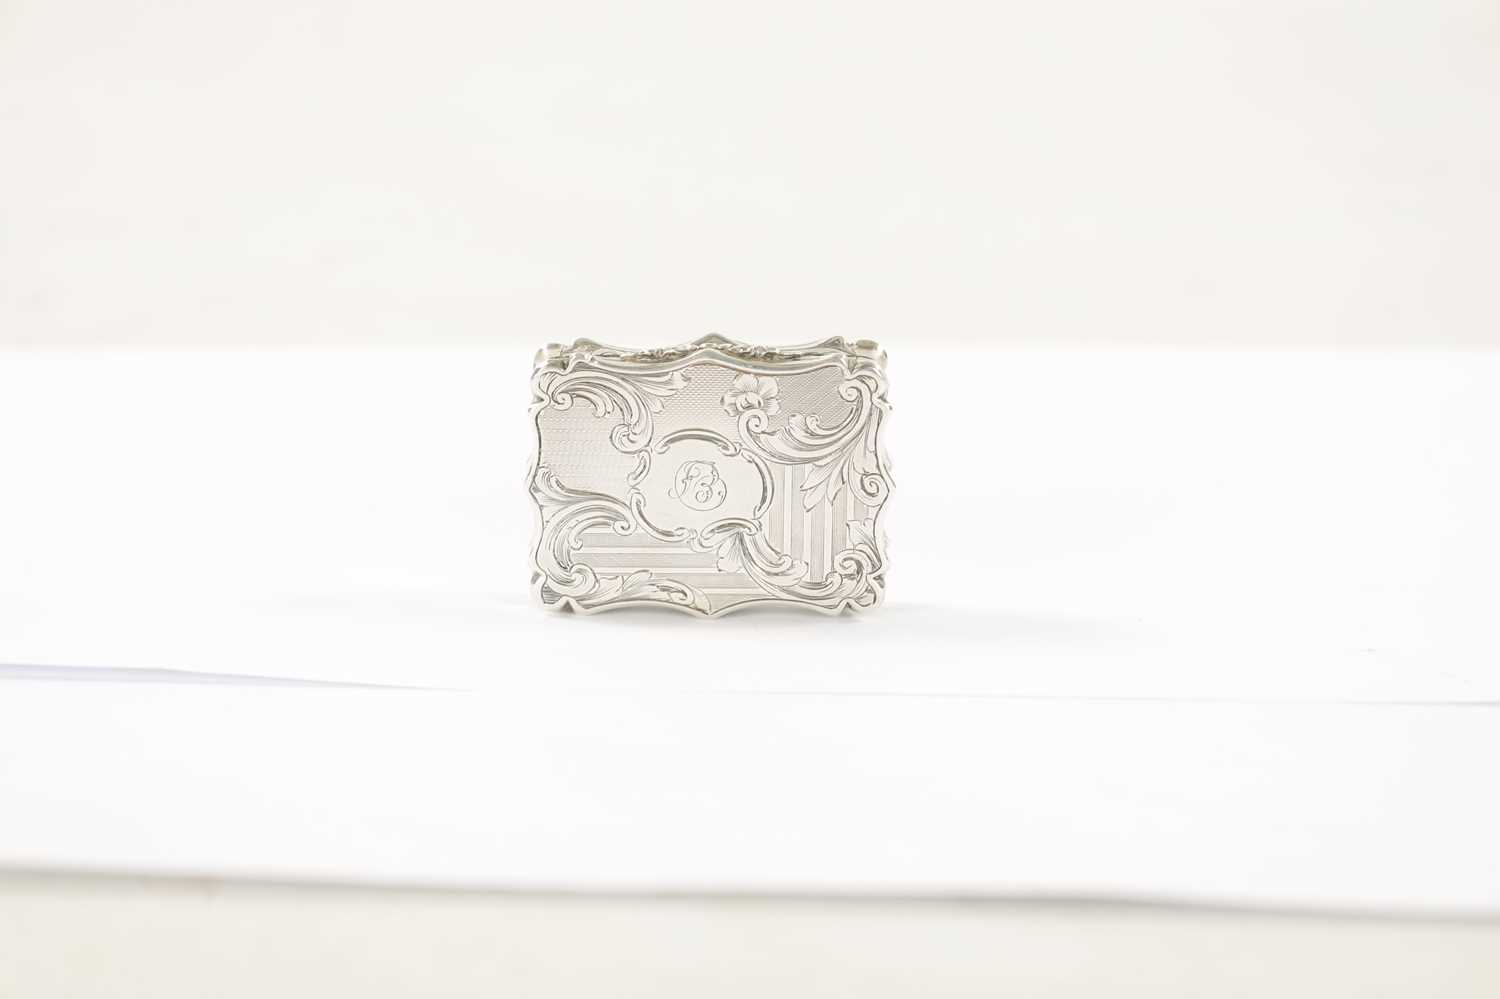 A NATHANIEL MILLS MID 19TH CENTURY SILVER VINAIGRETTE - Image 2 of 8